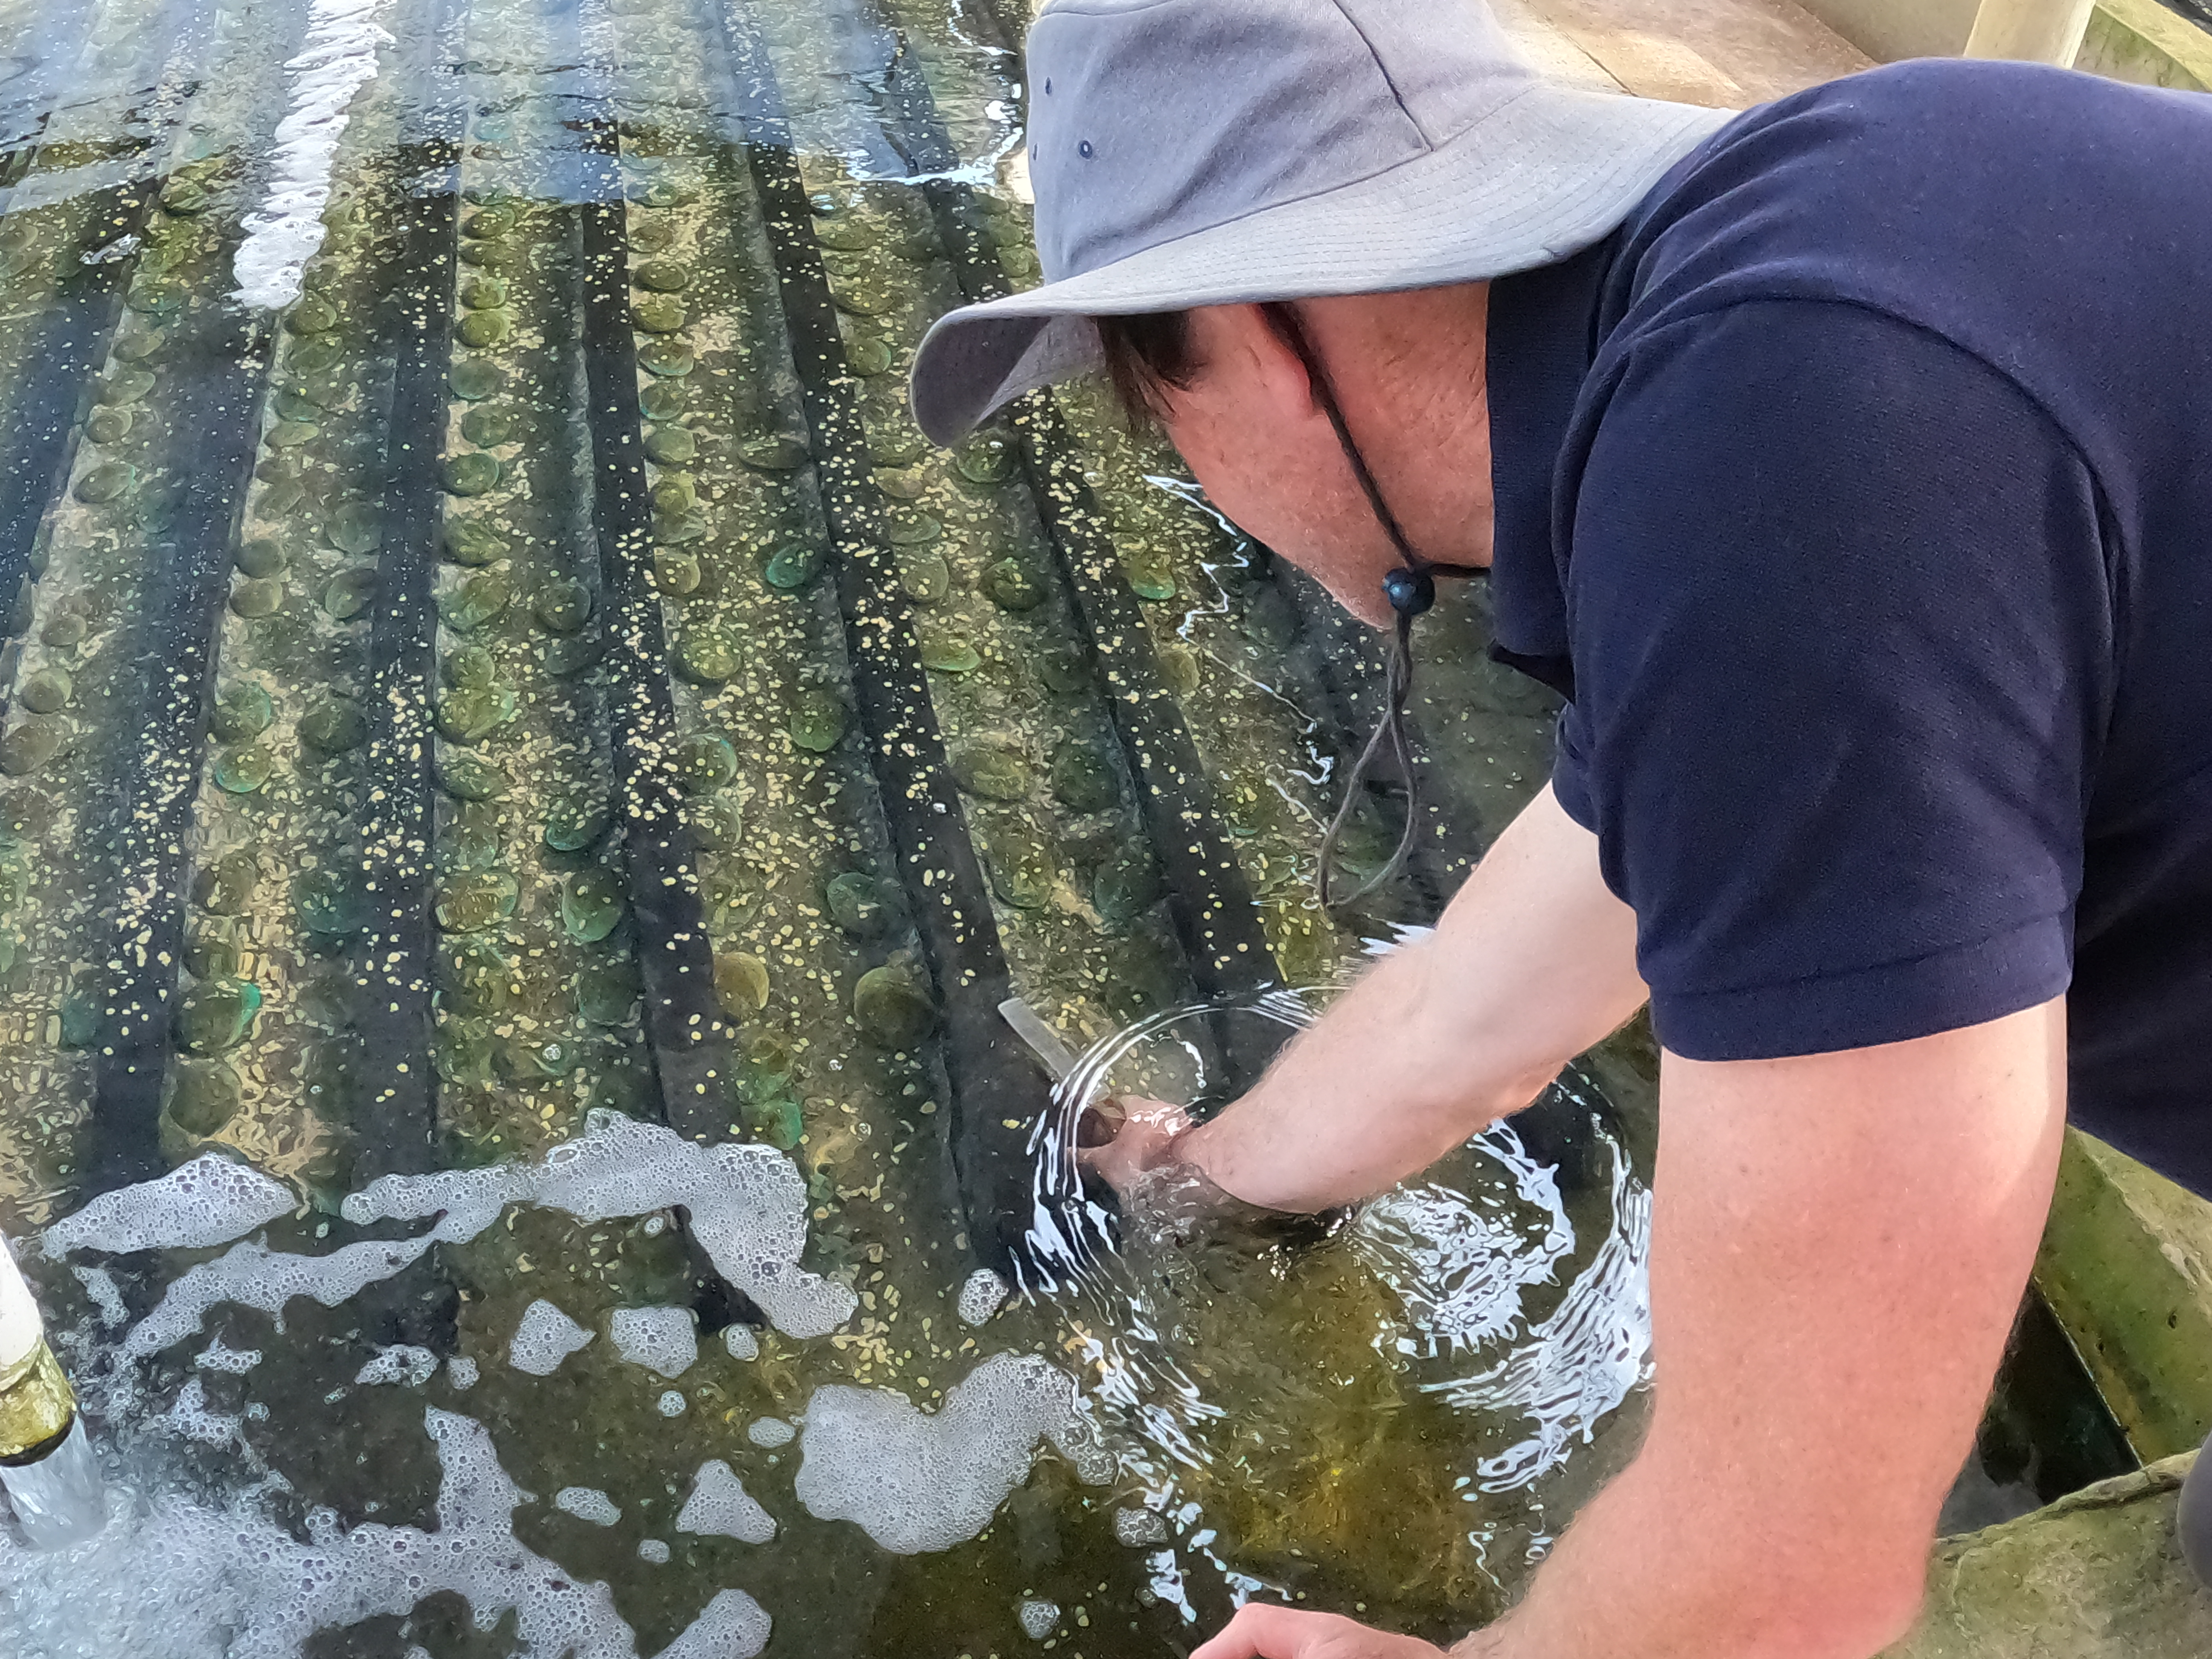 Joel Gilby, Managing Director of Three Friends, sifting through the water for a fresh Abalone